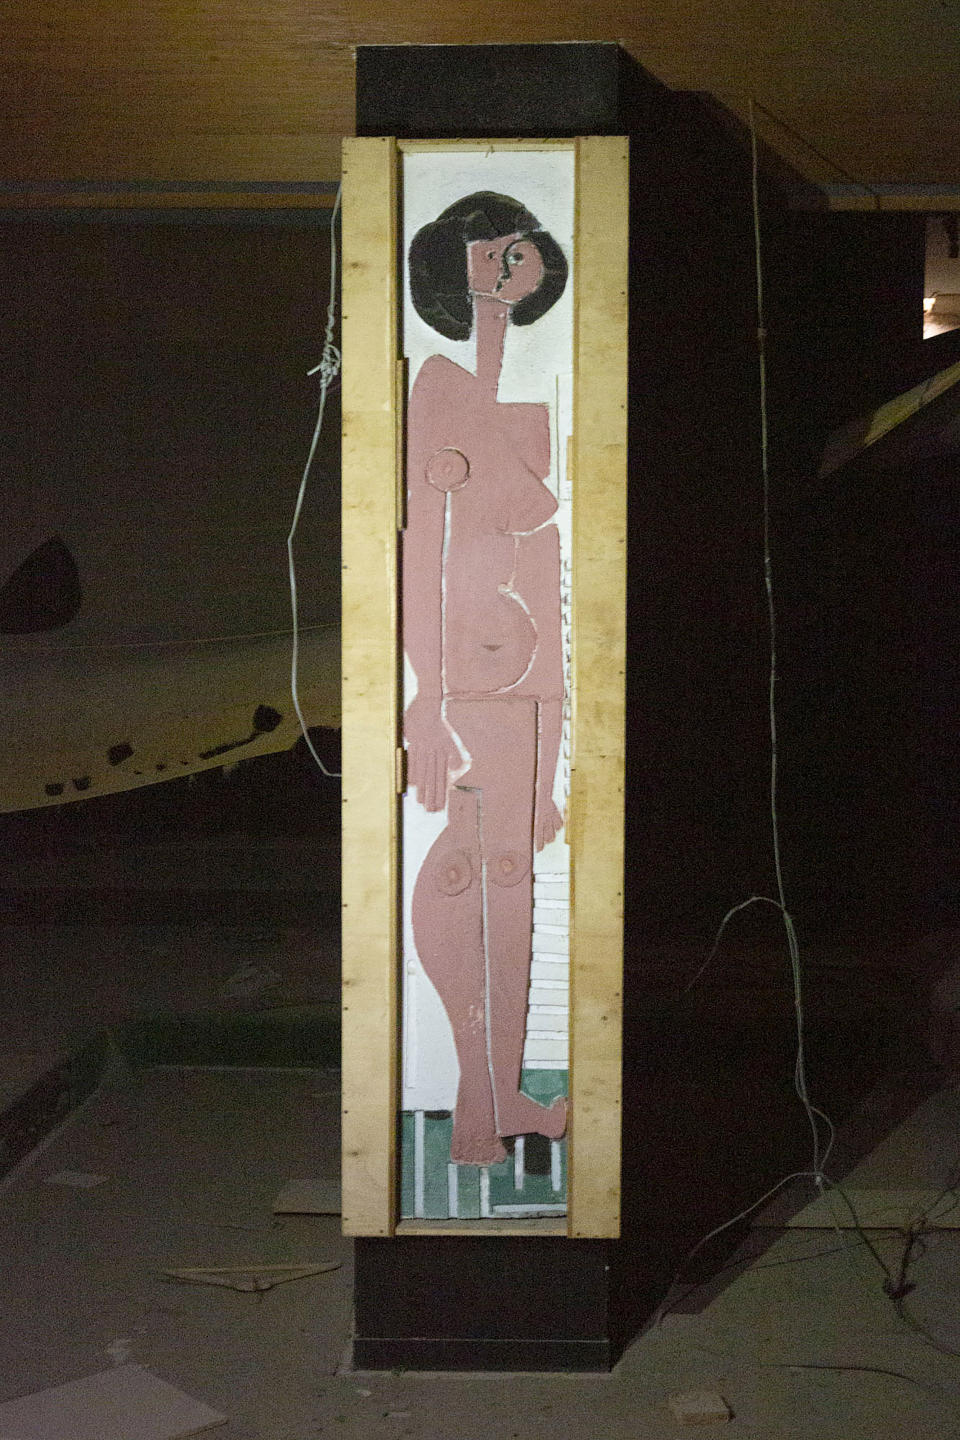 In this Tuesday Oct. 20, 2020 shows a priceless and very rare concrete relief by Cyprus' most avant-garde artist of the 1960s, Christoforos Savva, appears on the wall of the defunct Perroquet nightclub in the abandoned ghost-town of Varosha in the breakaway, Turkish Cypriot north of ethnically divided Cyprus. The artwork has been rediscovered after laying hidden for nearly half a century and the 93 year-old Greek Cypriot man who says he commissioned the reliefs wants them transferred to the country's internationally recognized southern part with the help of a bicommunal committee tasked with preserving and maintaining Cyprus' culture heritage. (Eleni Papadopoullou/Politis via AP)